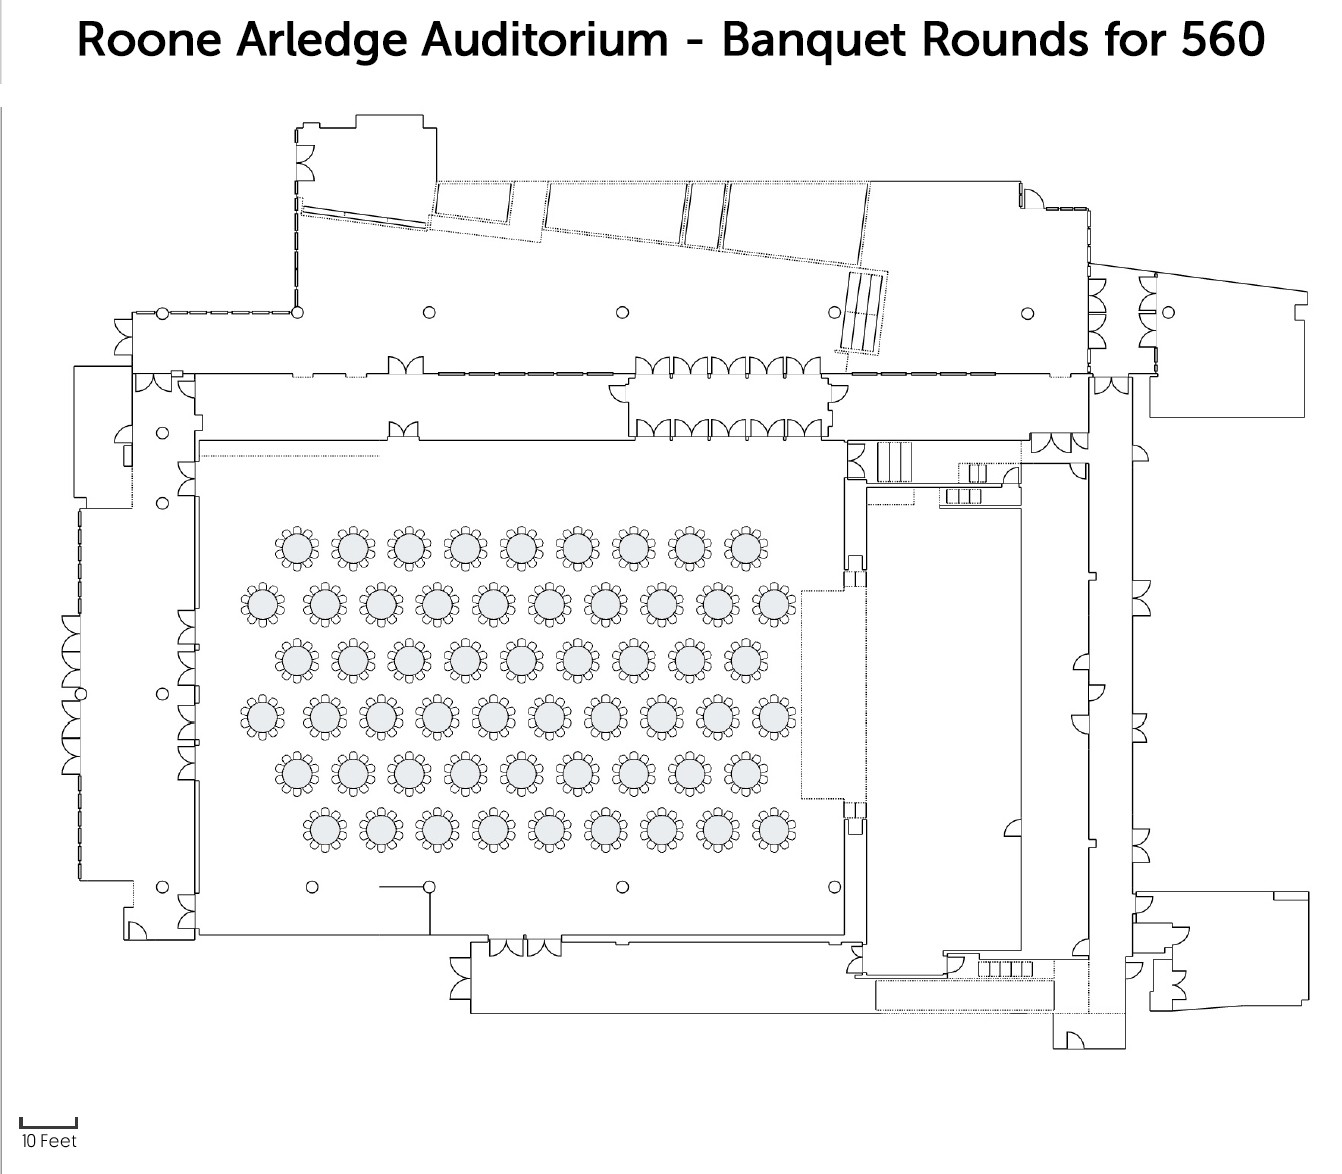 Roone Arledge - Banquet Rounds for 560